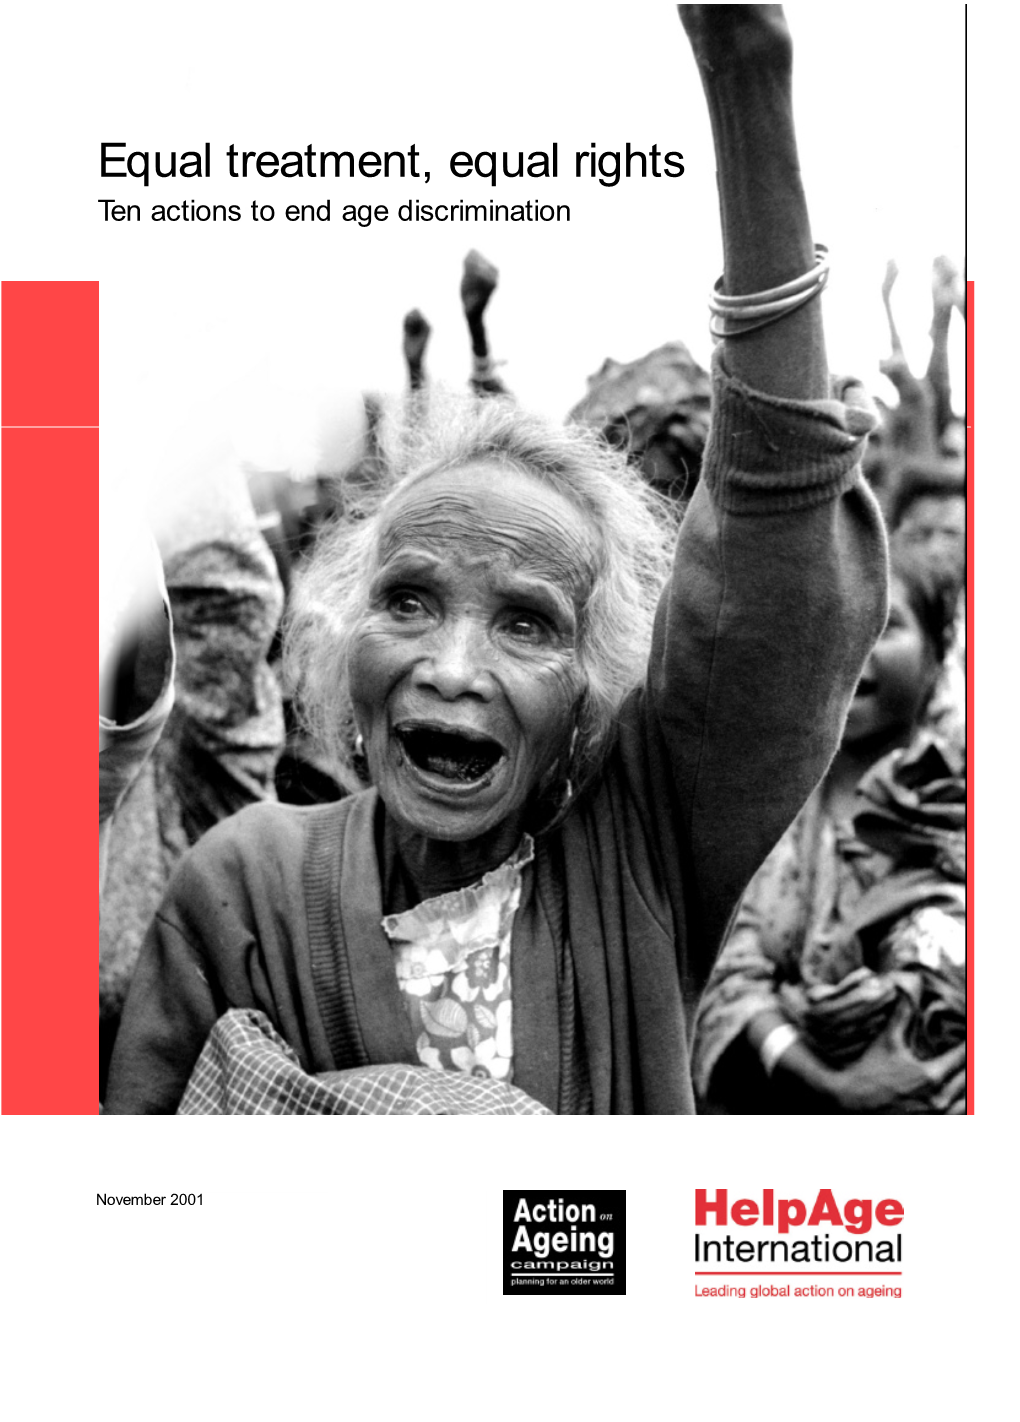 Equal Treatment, Equal Rights Ten Actions to End Age Discrimination